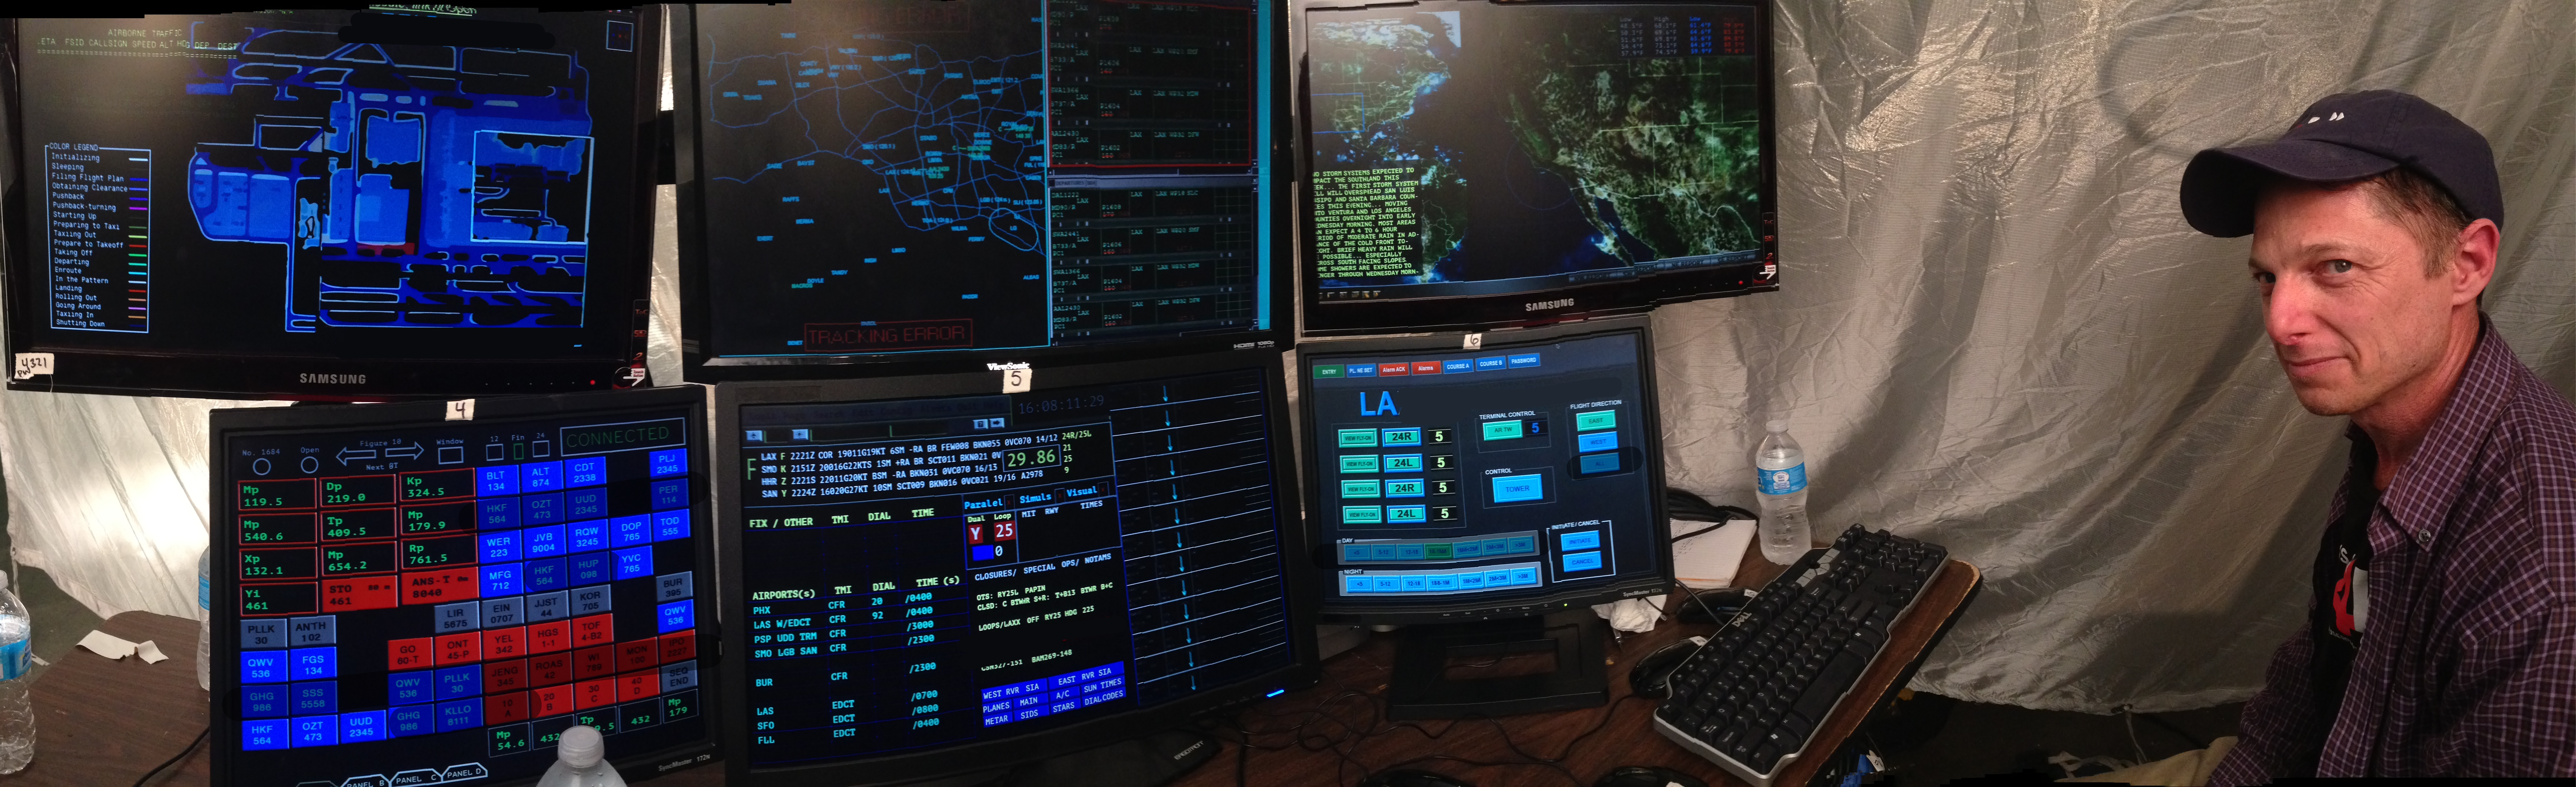 SCORPION: CBS TV Pilot: Authentic looking Air traffic control software was created for the LAX control Tower scenes.